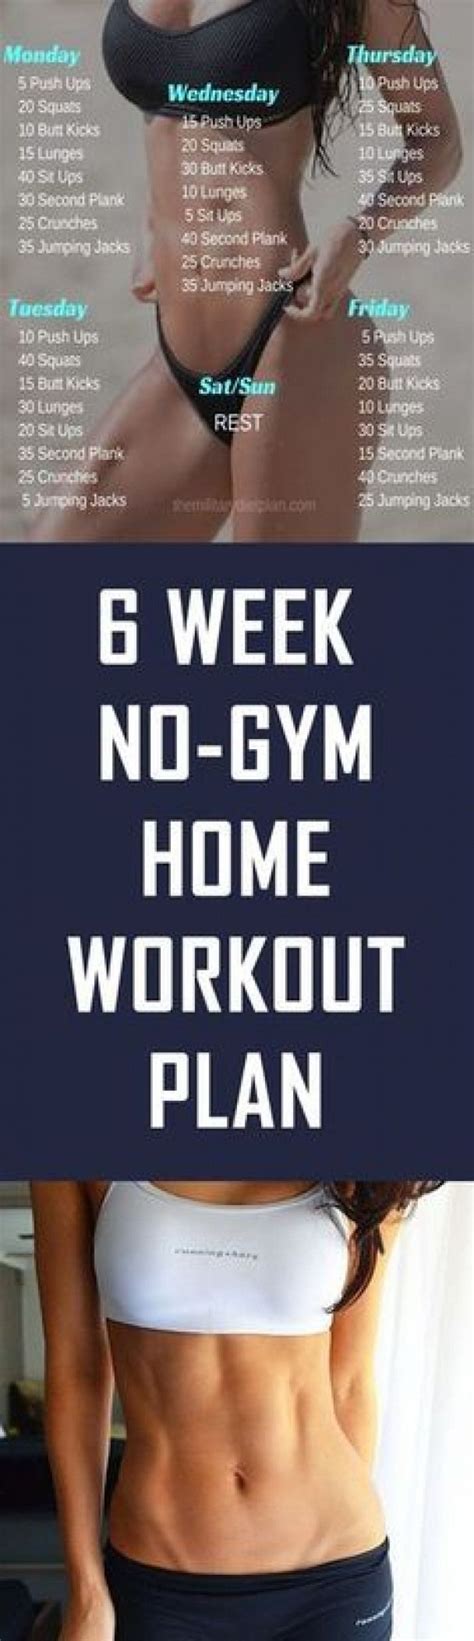 This workout plan is extremely effective and the best part is that you can do it in the comfort of your home. 6 Week No-Gym Home Workout Plan #dietworkout | Workout ...